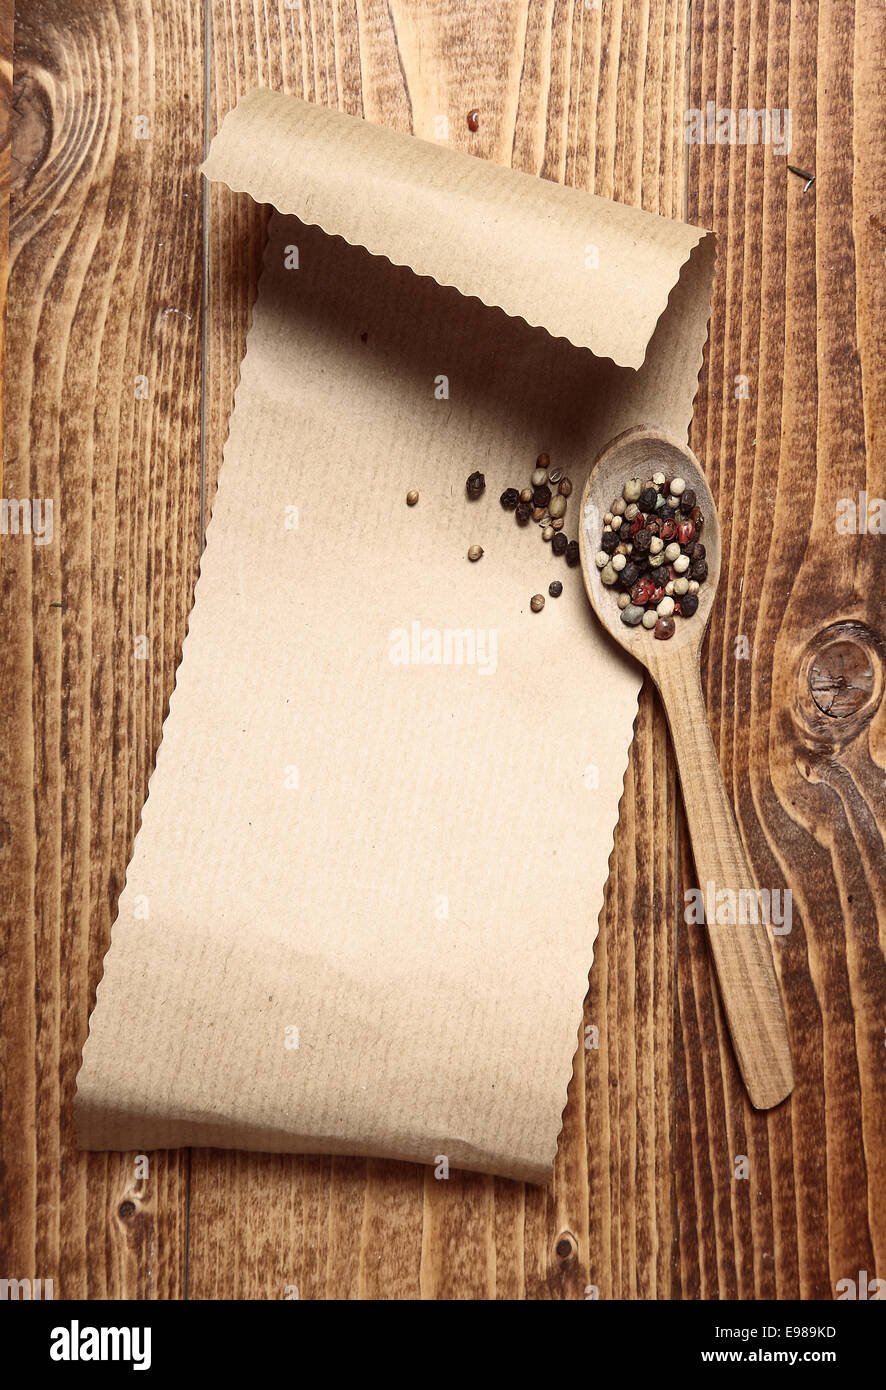 Brown paper on wood with a wooden spoon and peppercorns Stock Photo